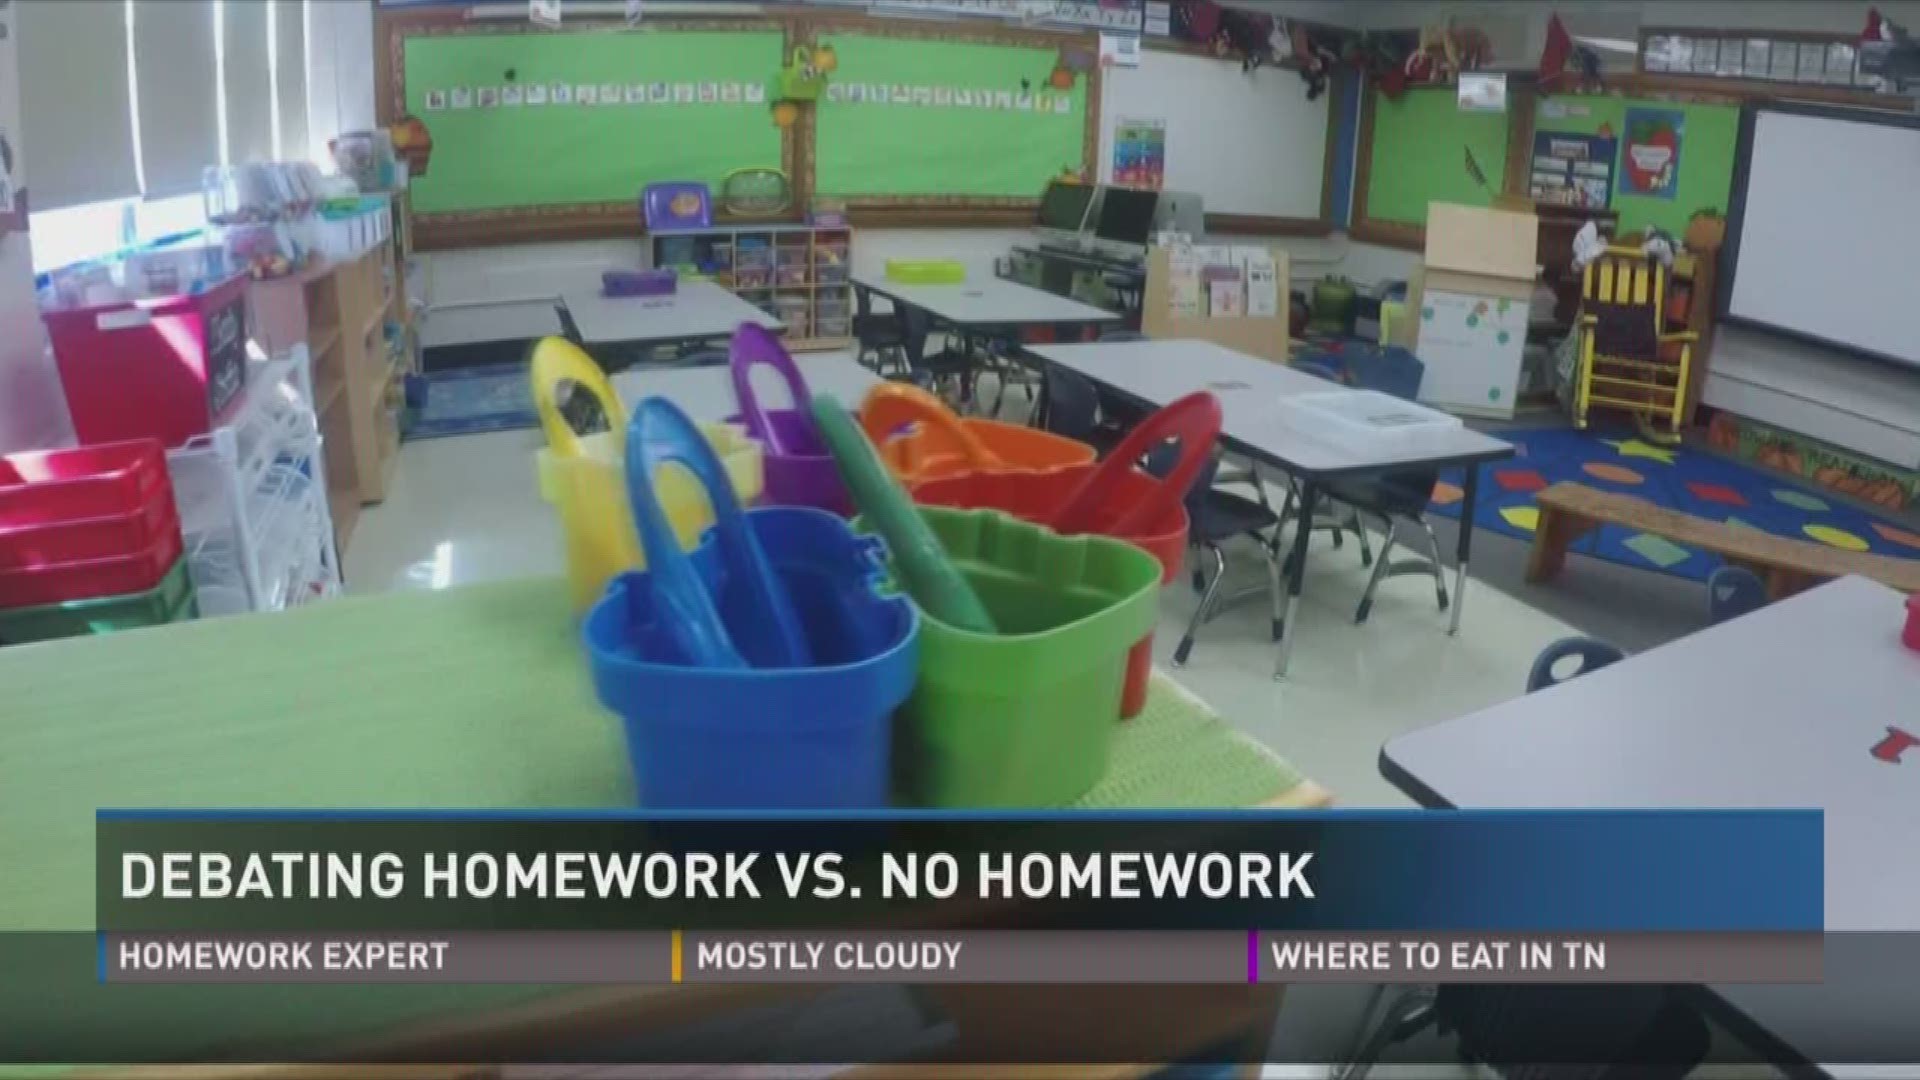 Aug. 1, 2017: As students get ready to head back to school, the same debate starts up again: homework vs. no homework.